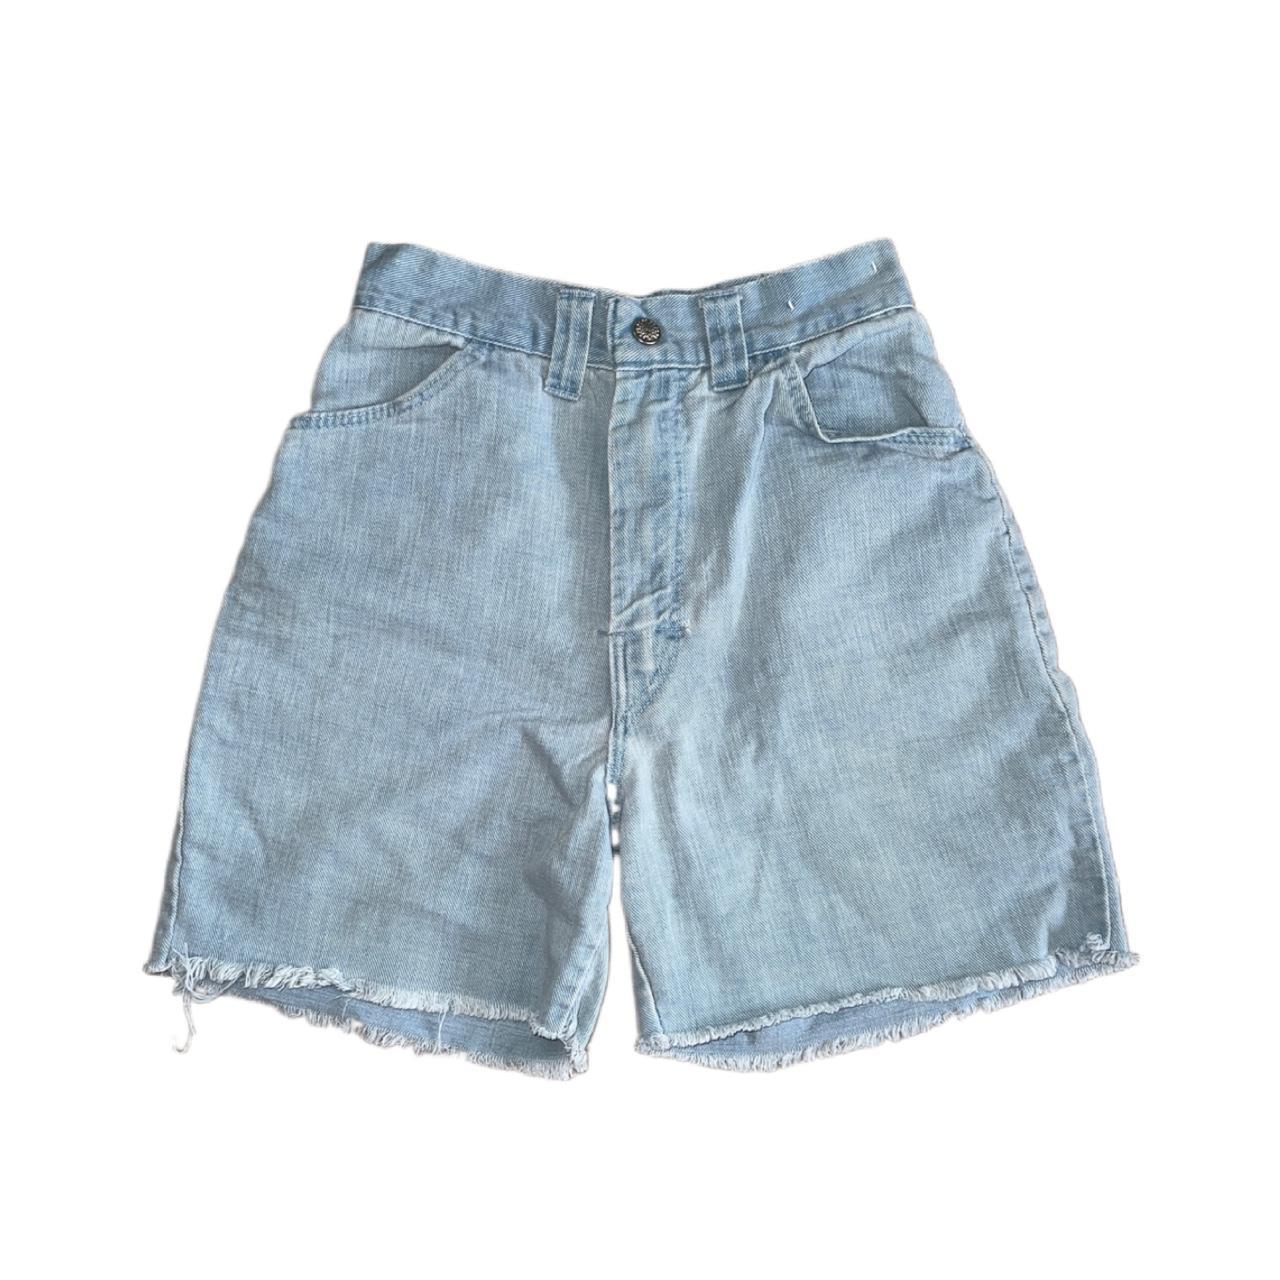 Vintage high-waisted light wash cut-off shorts with... - Depop